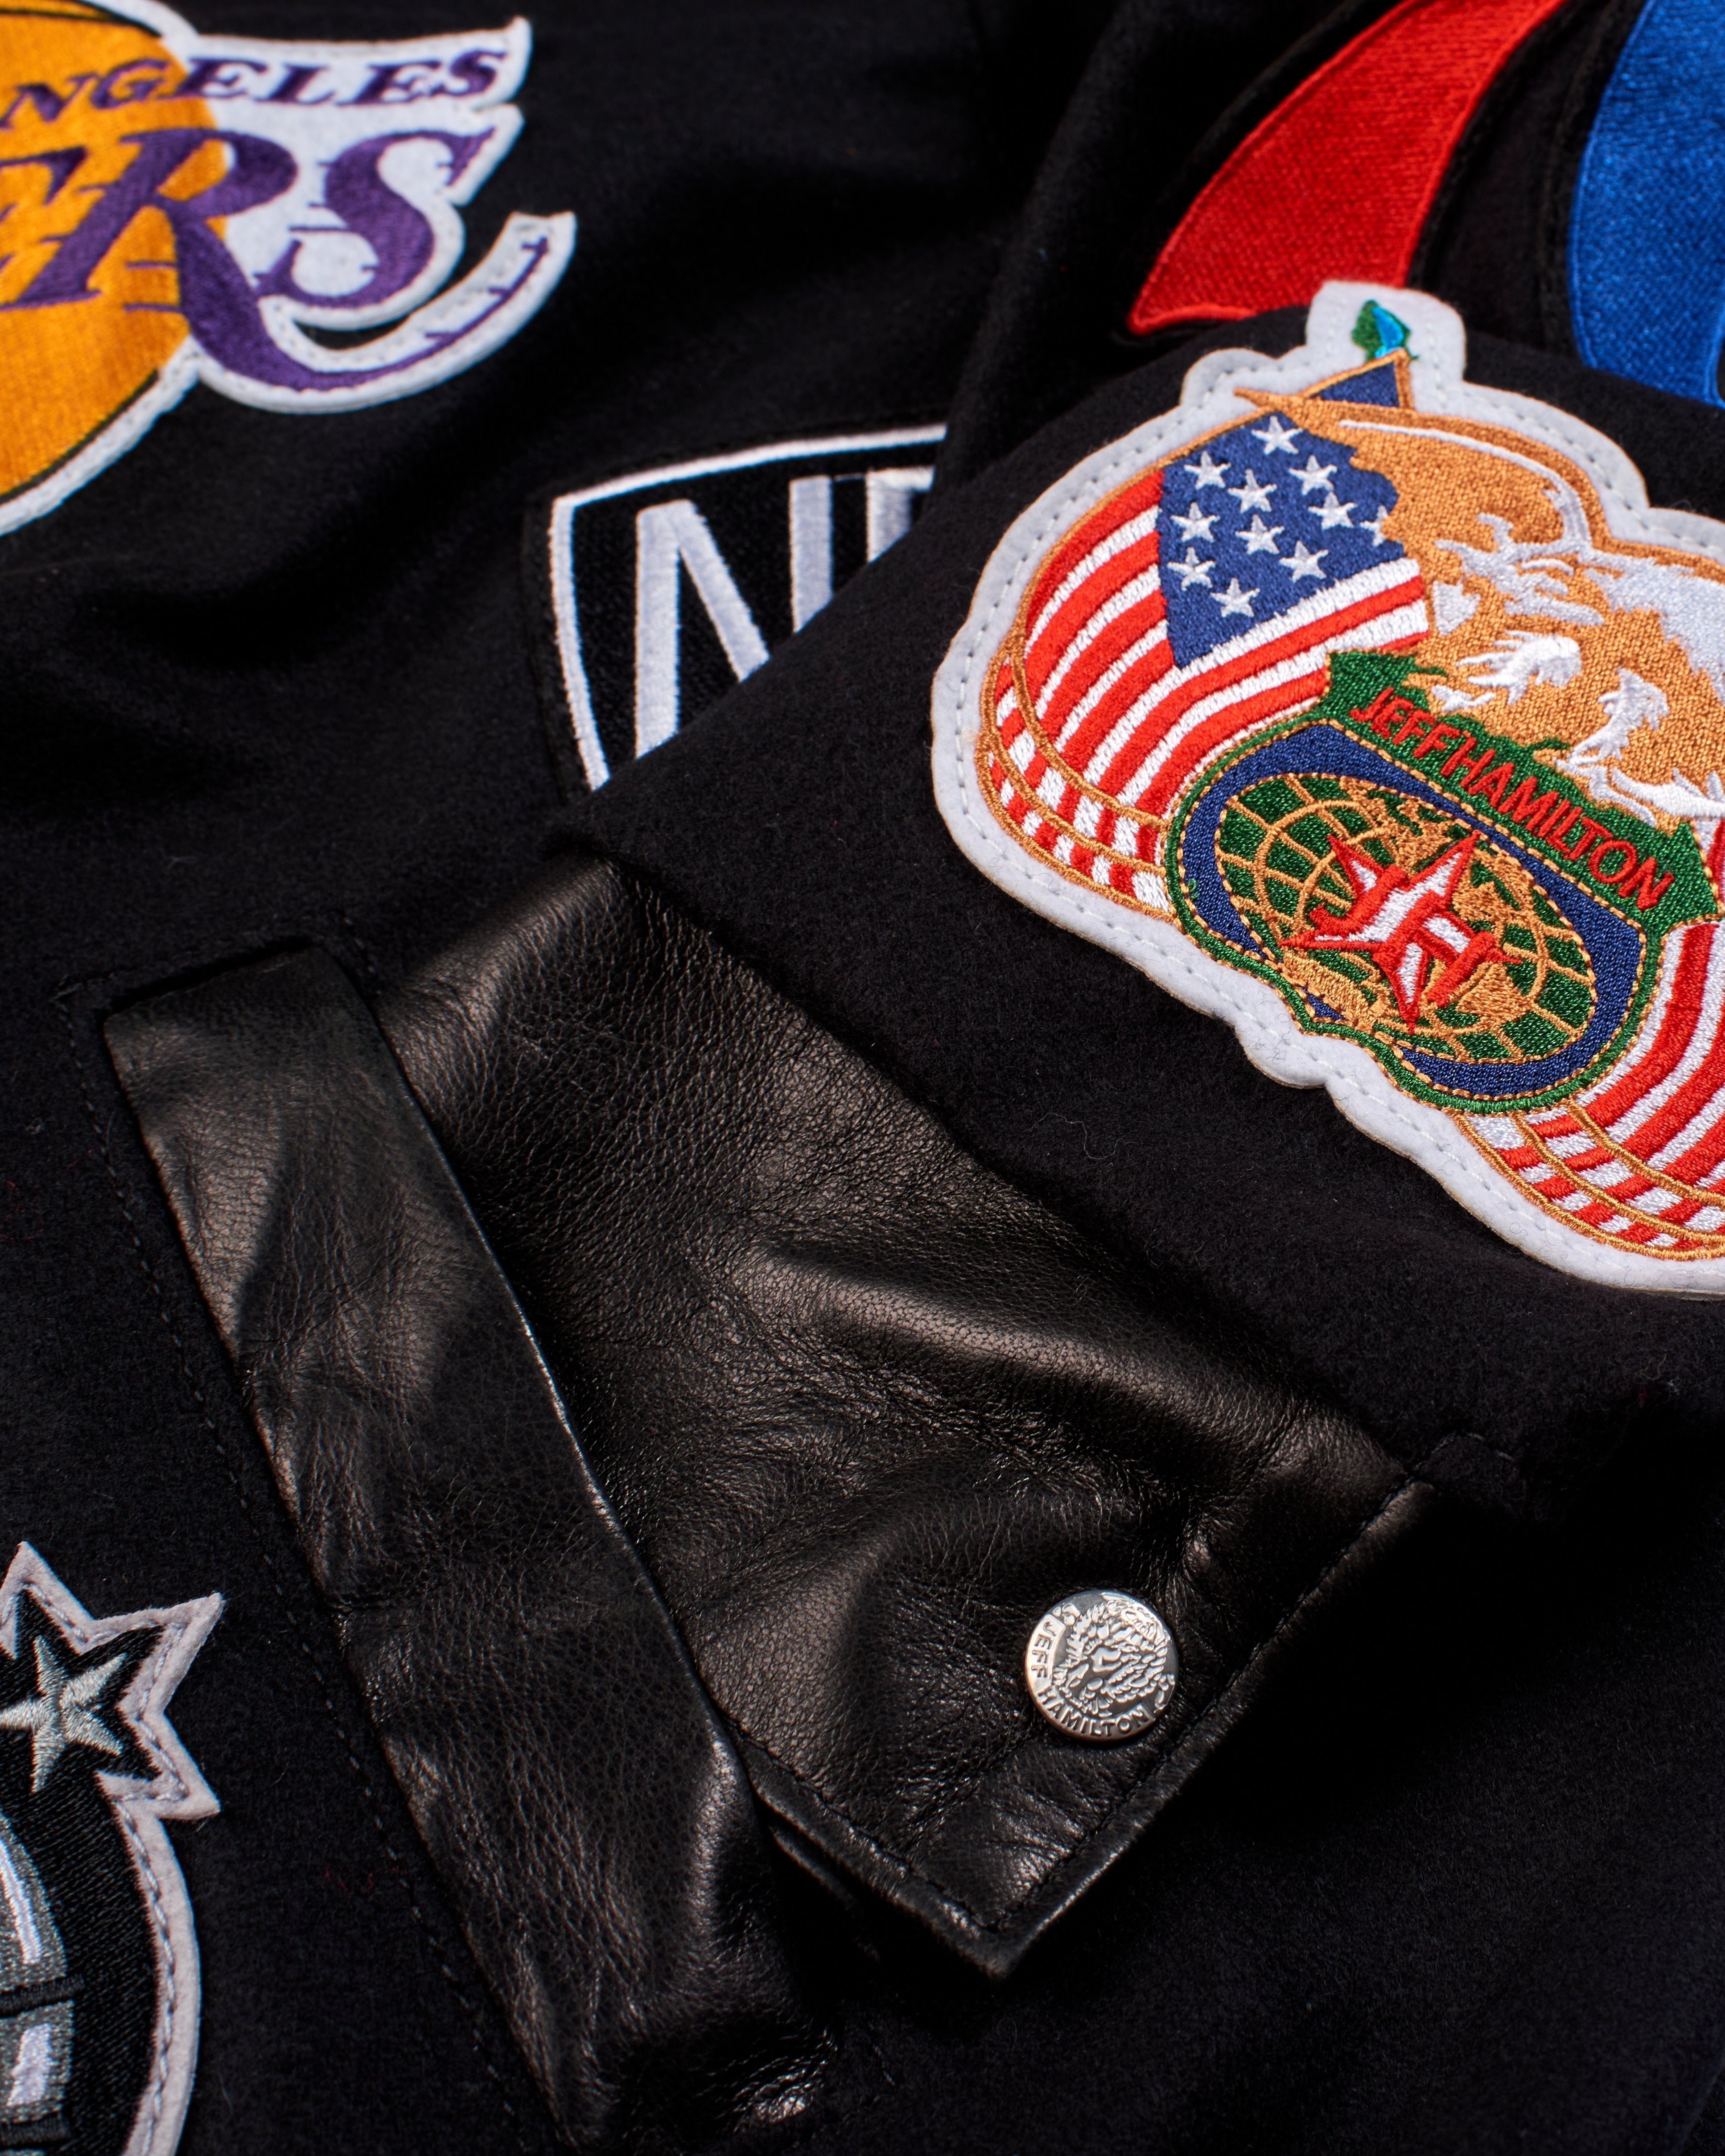 NBA Collage Wool & Leather Jacket Green